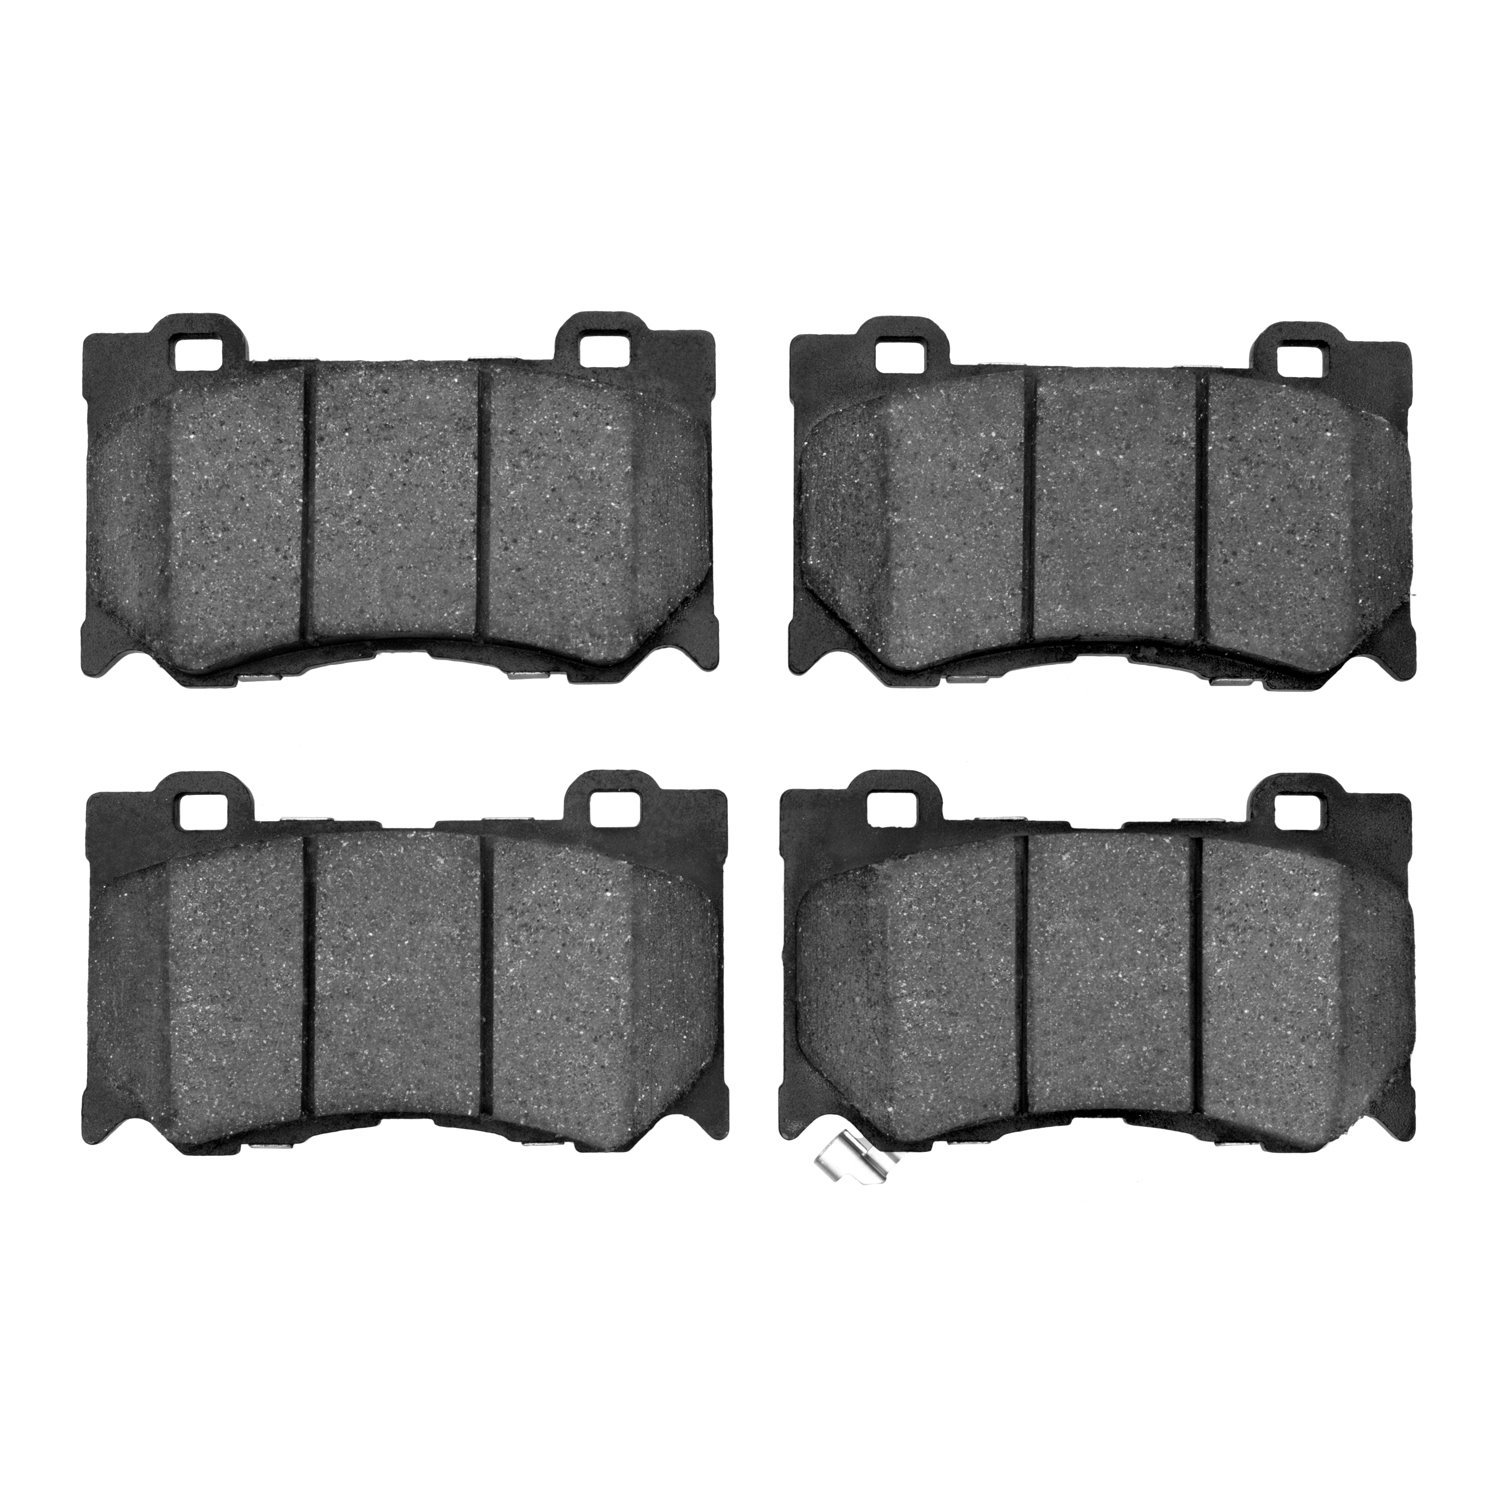 1310-1346-00 3000-Series Ceramic Brake Pads, Fits Select Infiniti/Nissan, Position: Front